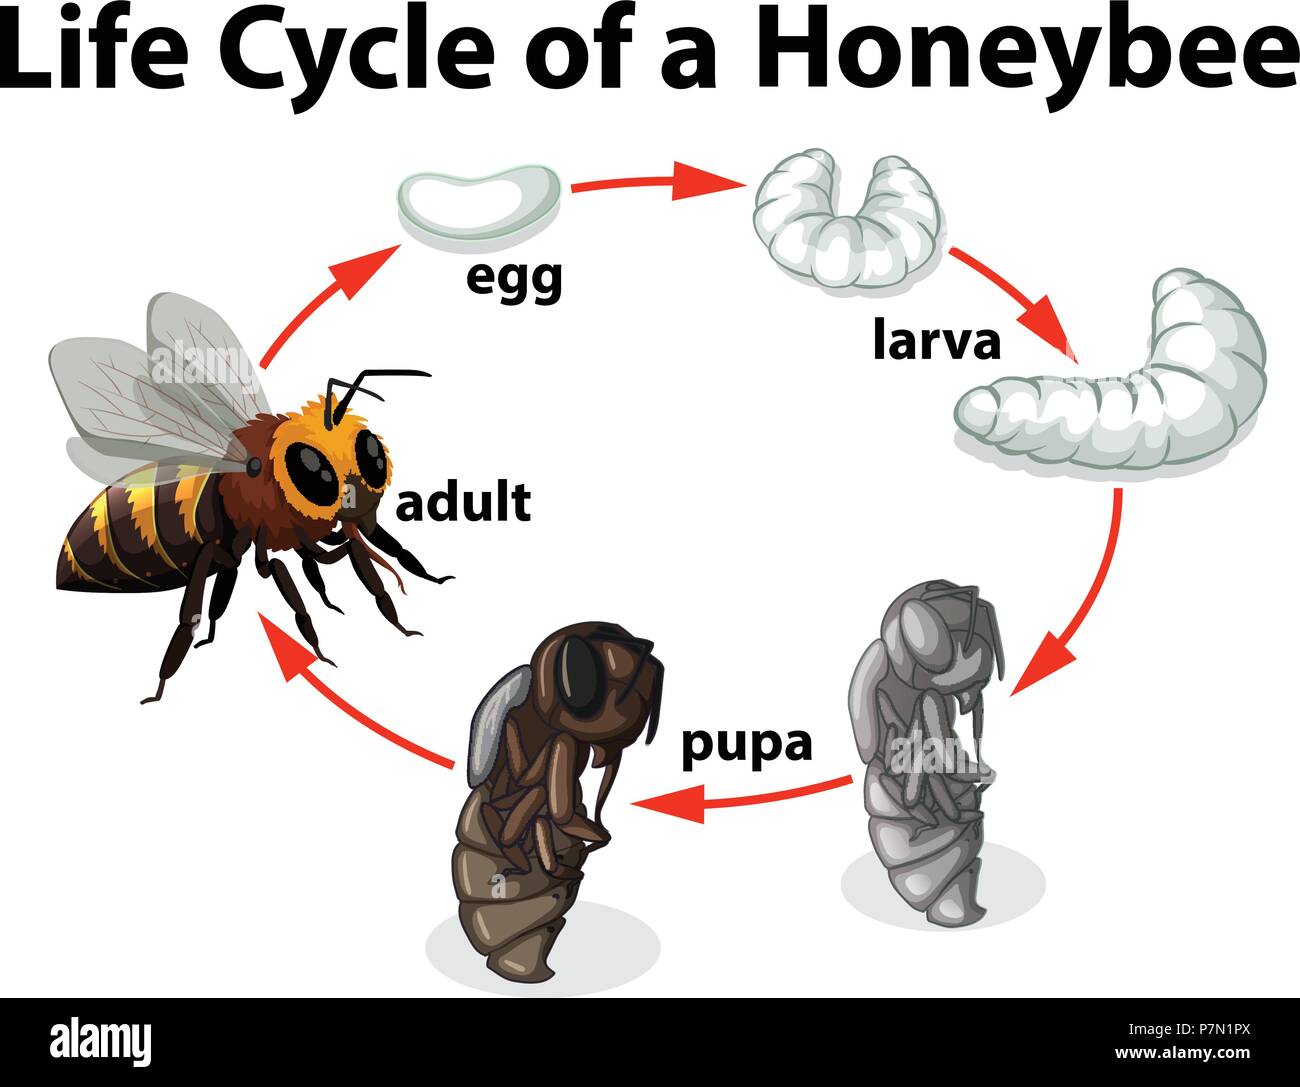 Life Cycle of A Honeybee illustration Stock Vector